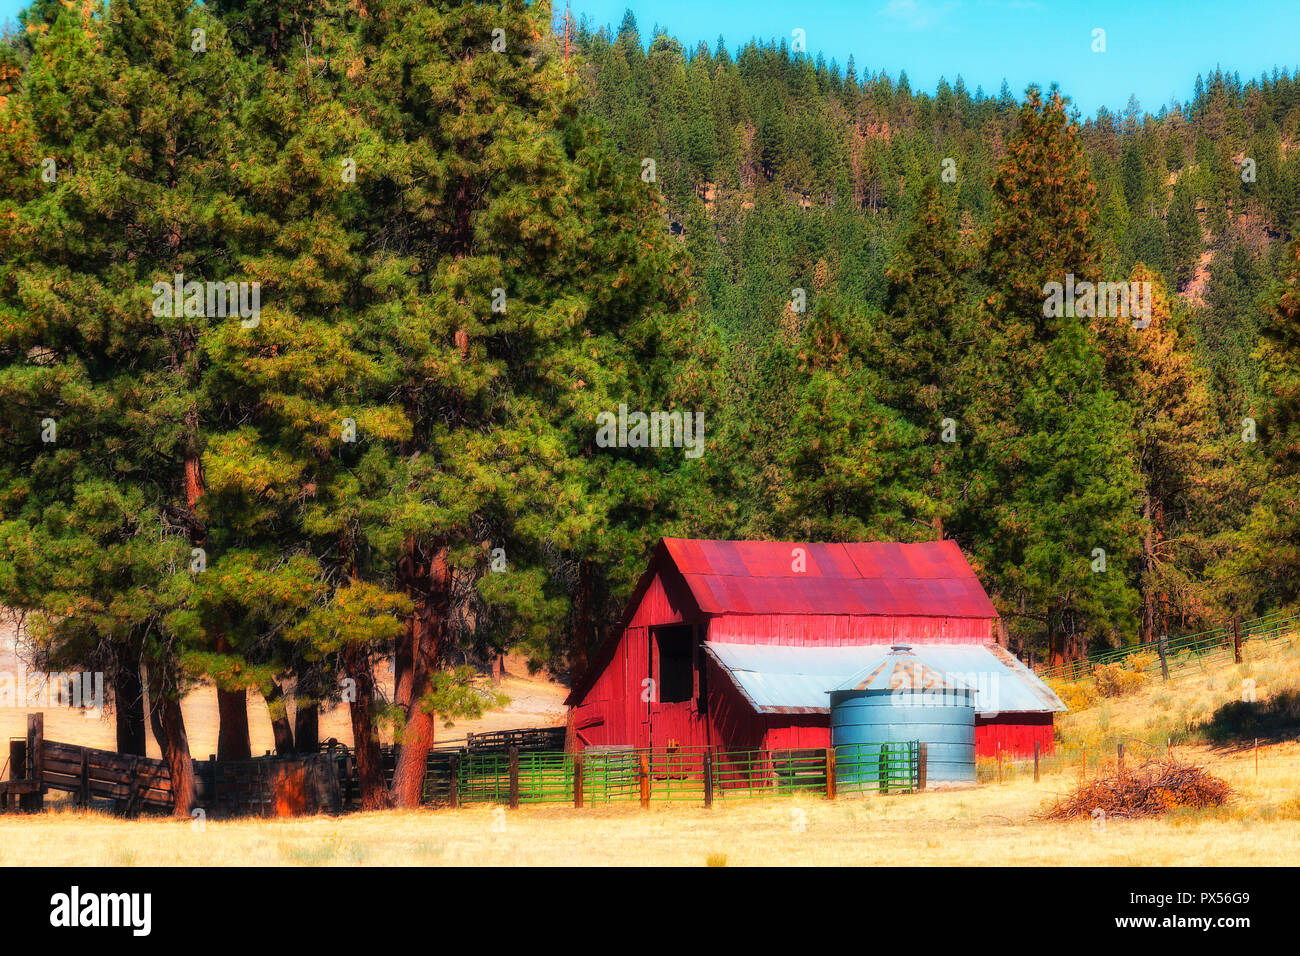 Pine Trees cover the hillside where a red barn, silo and corral nestle under a stand of trees at the edge of a field near Bly, Oregon Stock Photo